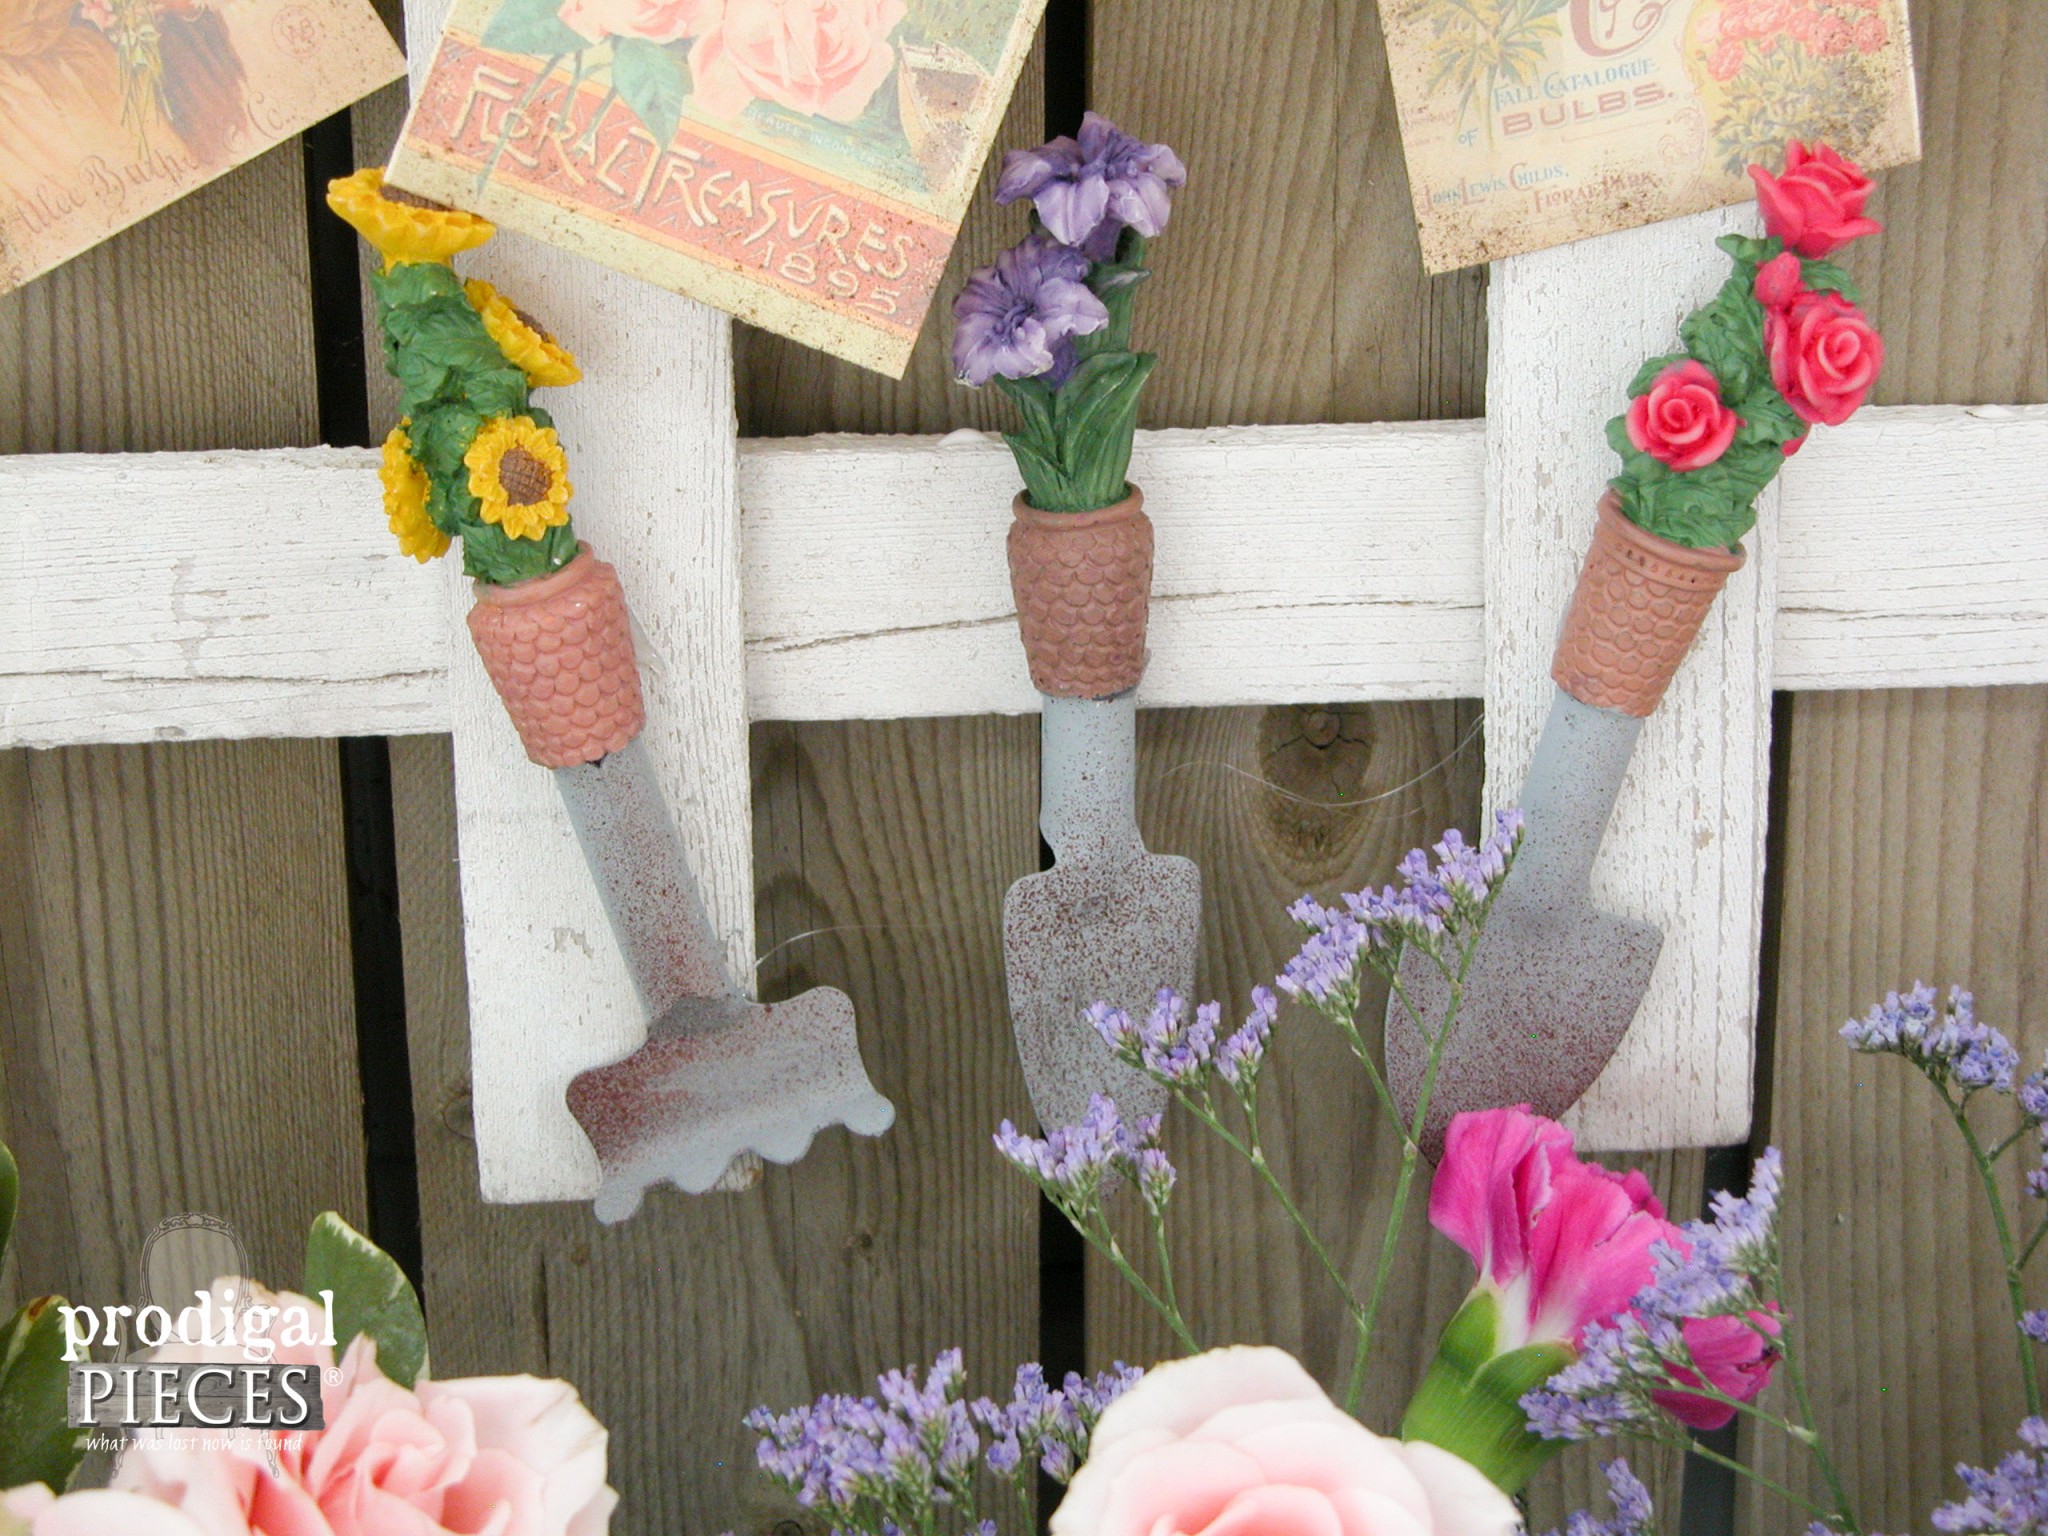 Miniature Garden Tools on Repurposed PIcket Fence by Prodigal Pieces | www.prodigalpieces.com